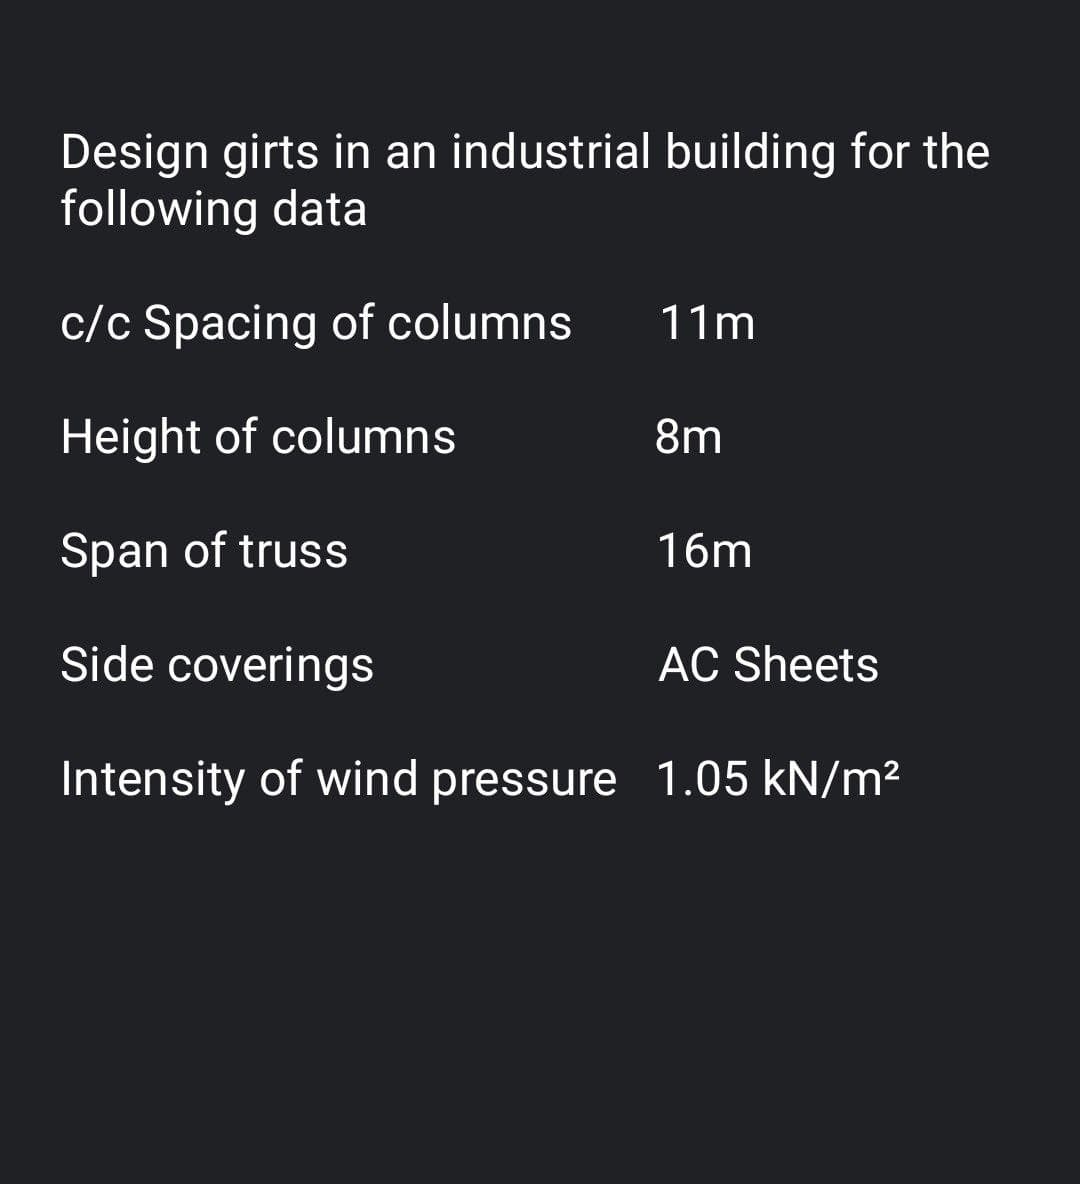 Design girts in an industrial building for the
following data
c/c Spacing of columns
11m
Height of columns
8m
Span of truss
16m
Side coverings
AC Sheets
Intensity of wind pressure 1.05 kN/m²
